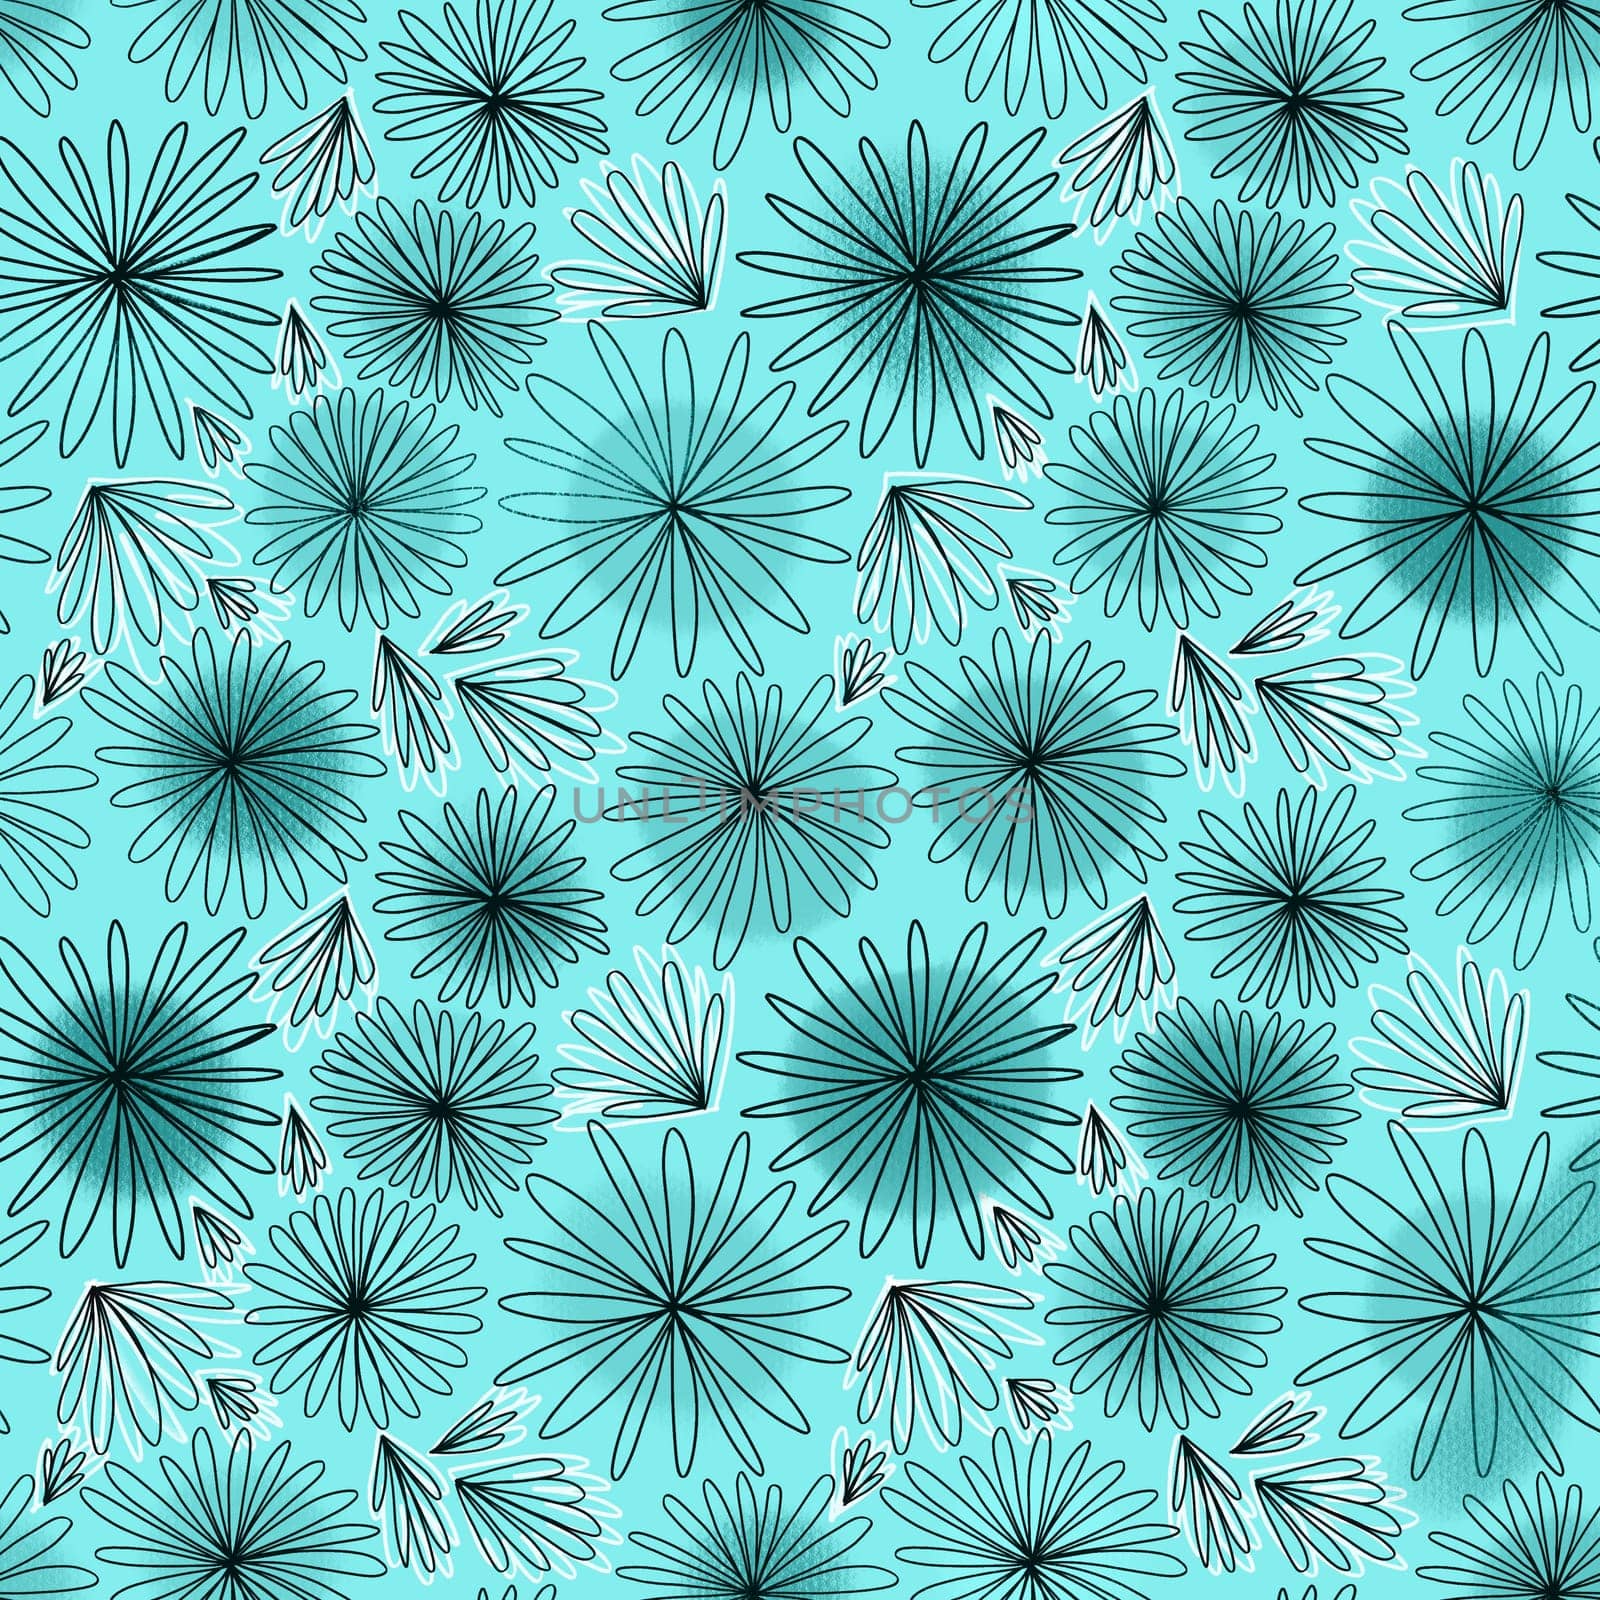 Blue botanical pattern with dandelions by Dustick